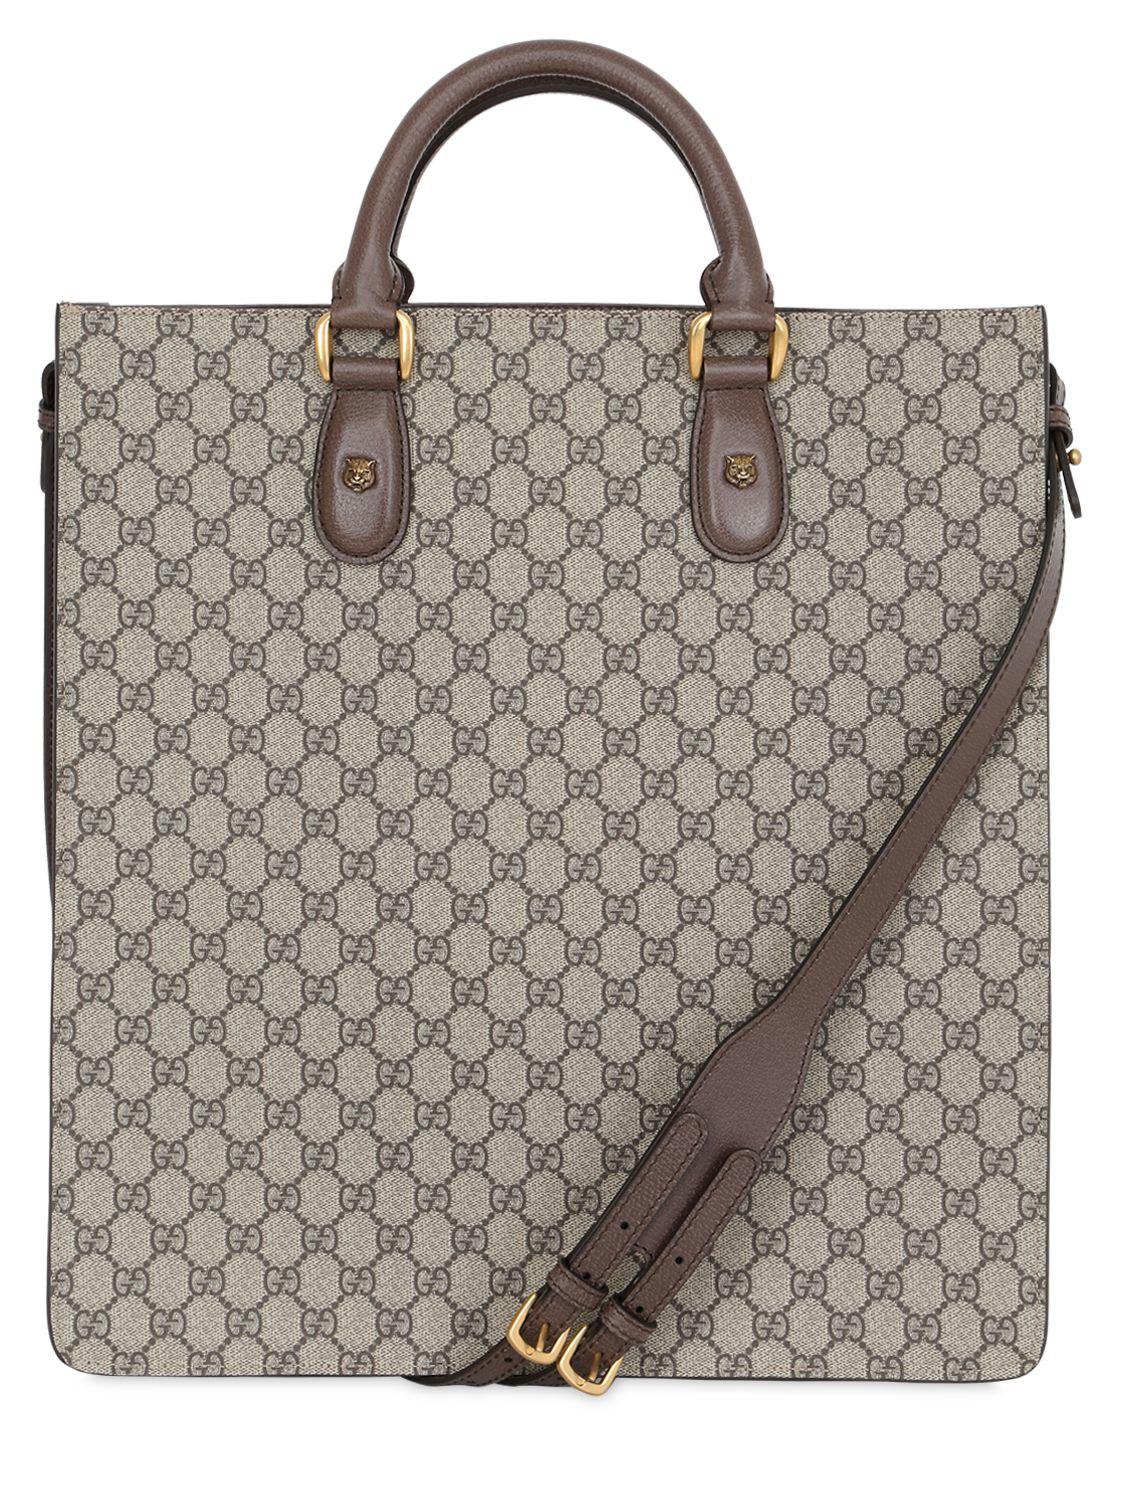 Lyst - Gucci Bee Patch Gg Supreme Tote Bag in Natural